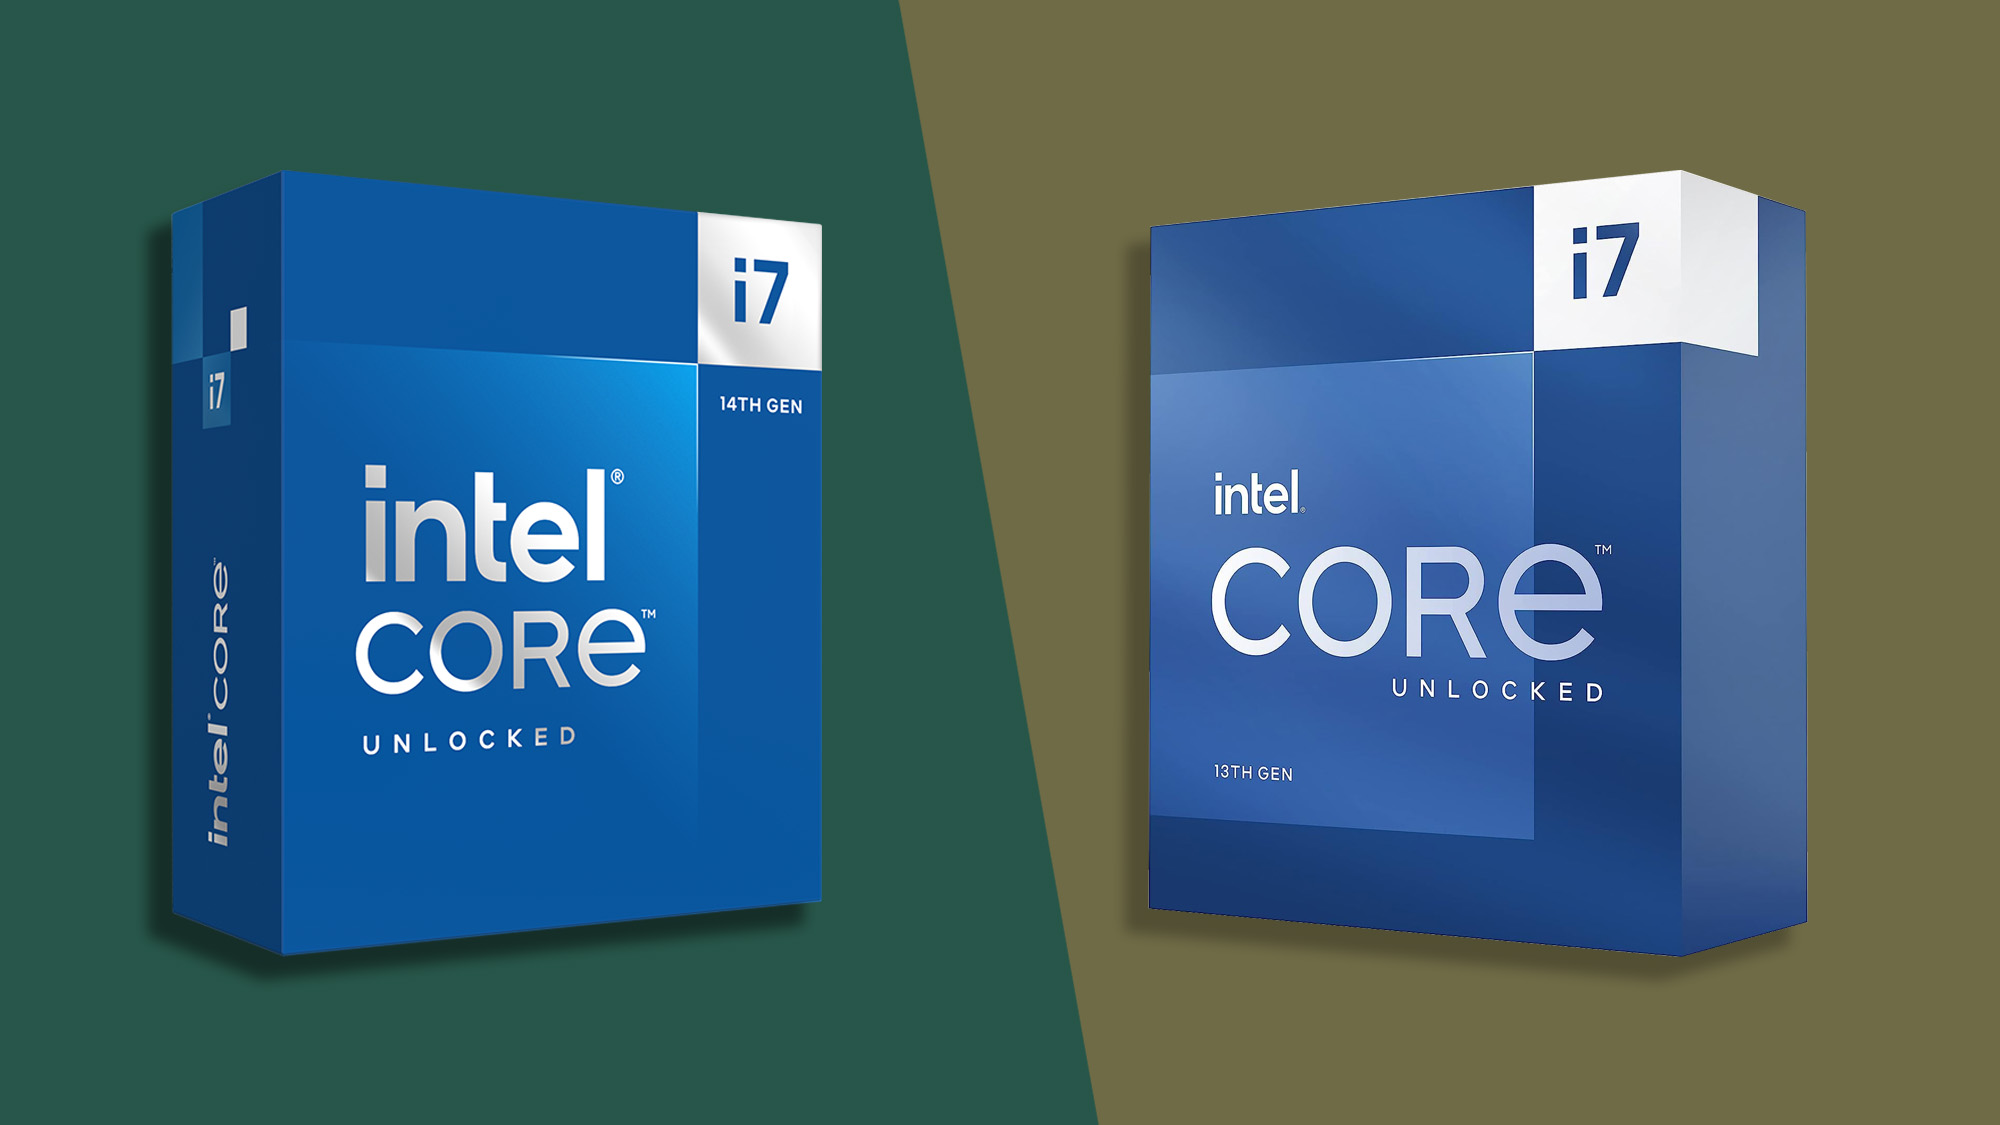 Intel Core i7-14700K rumoured to up its core/thread count; Core i9